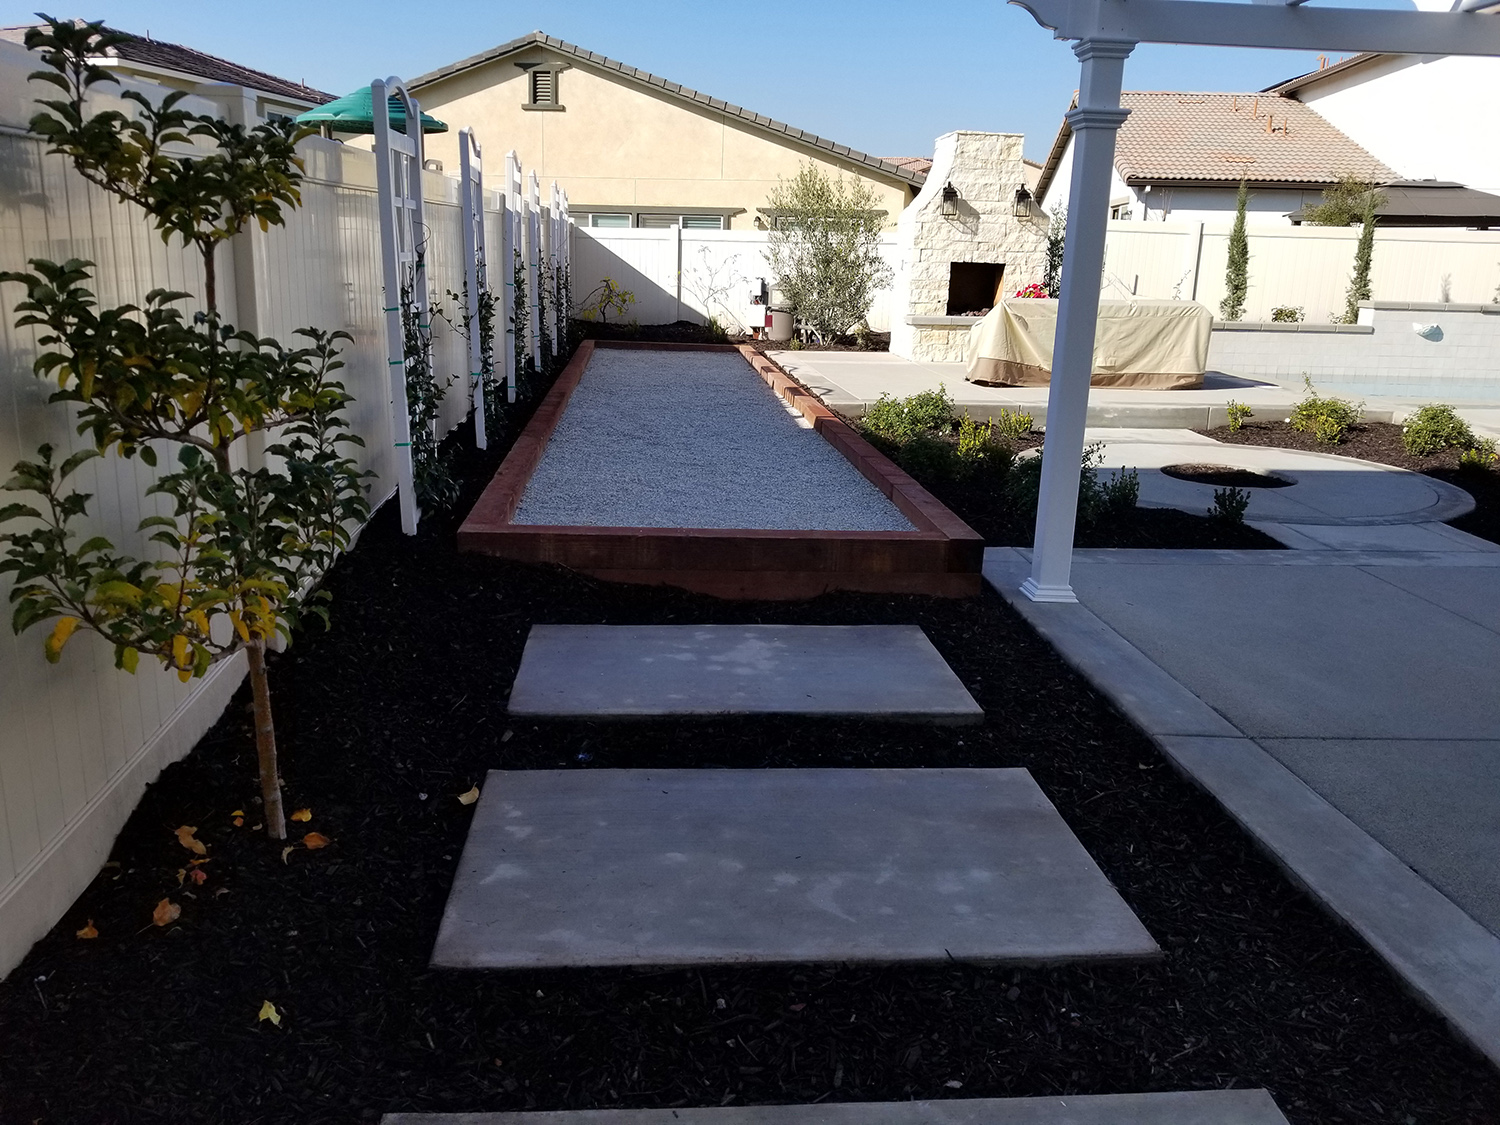 Bocce ball court, plantings, outdoor fireplace